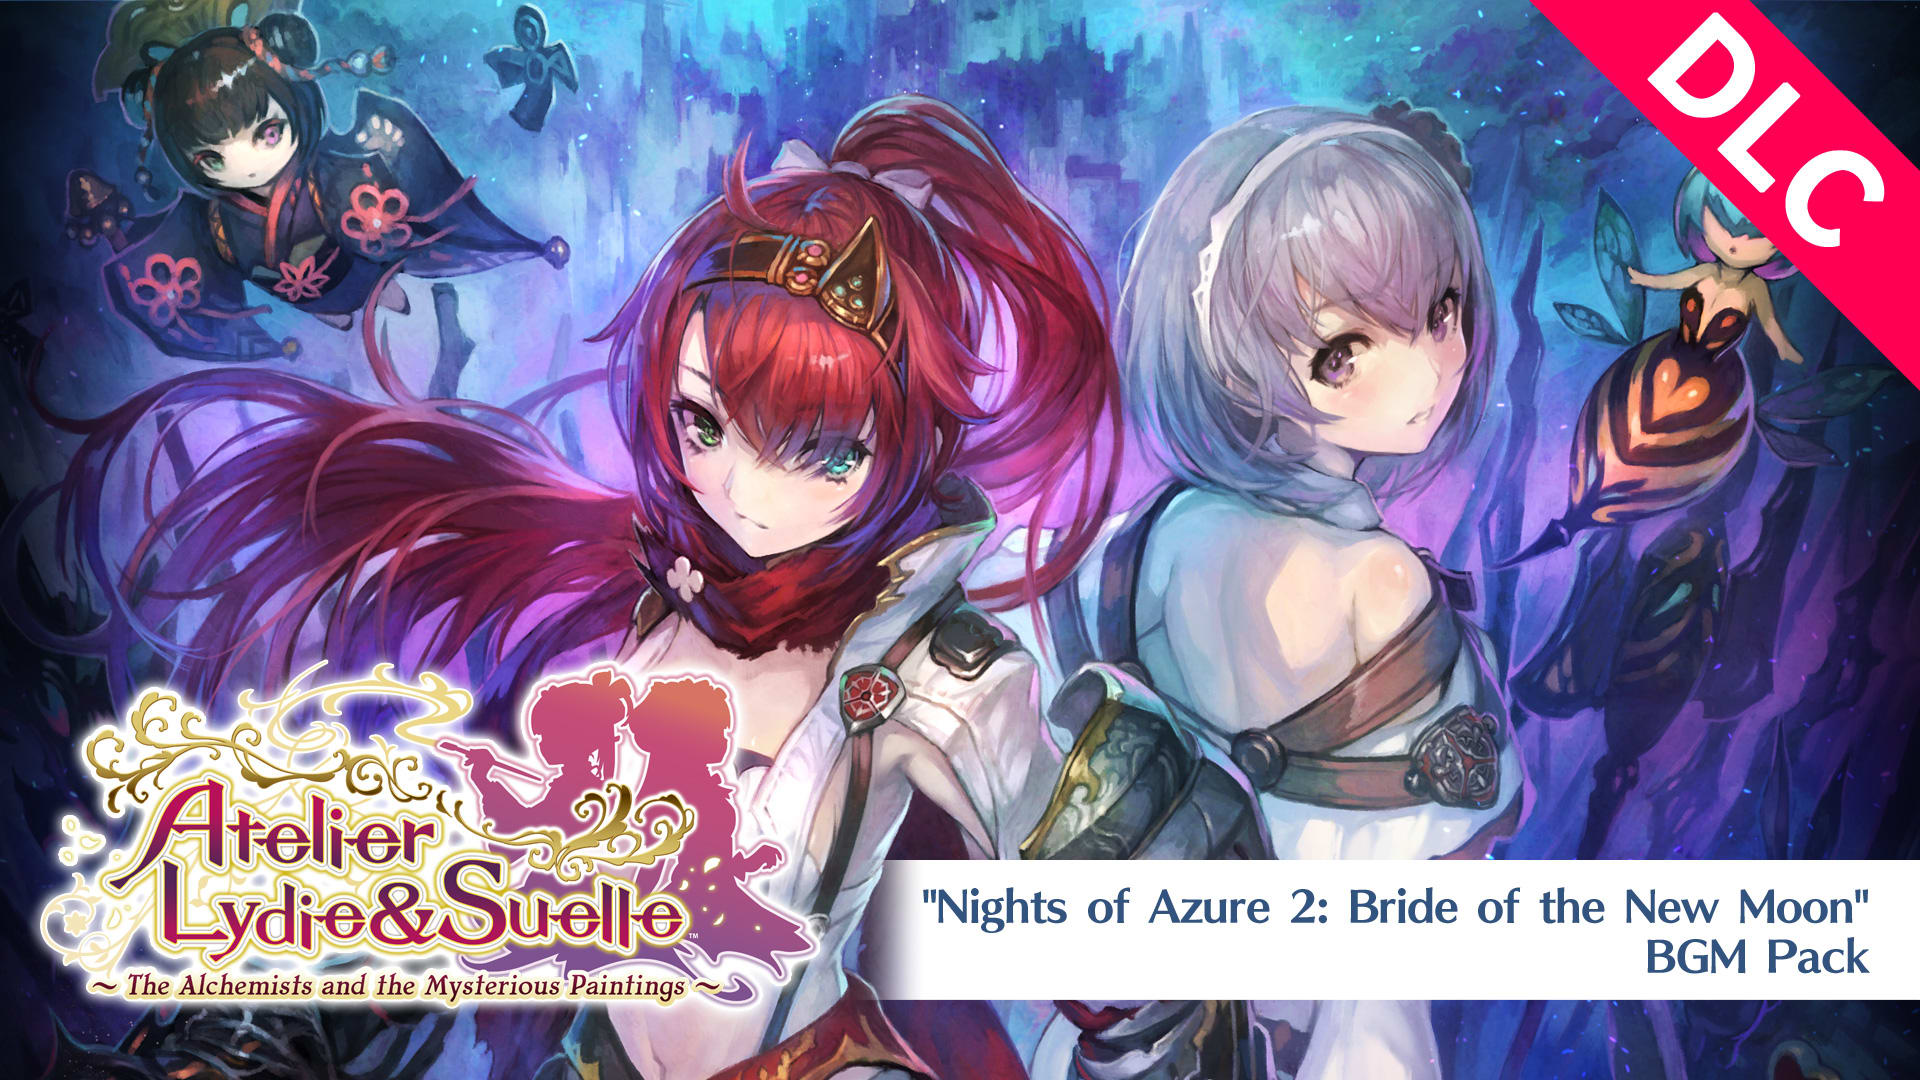 "Nights of Azure 2: Bride of the New Moon" BGM Pack